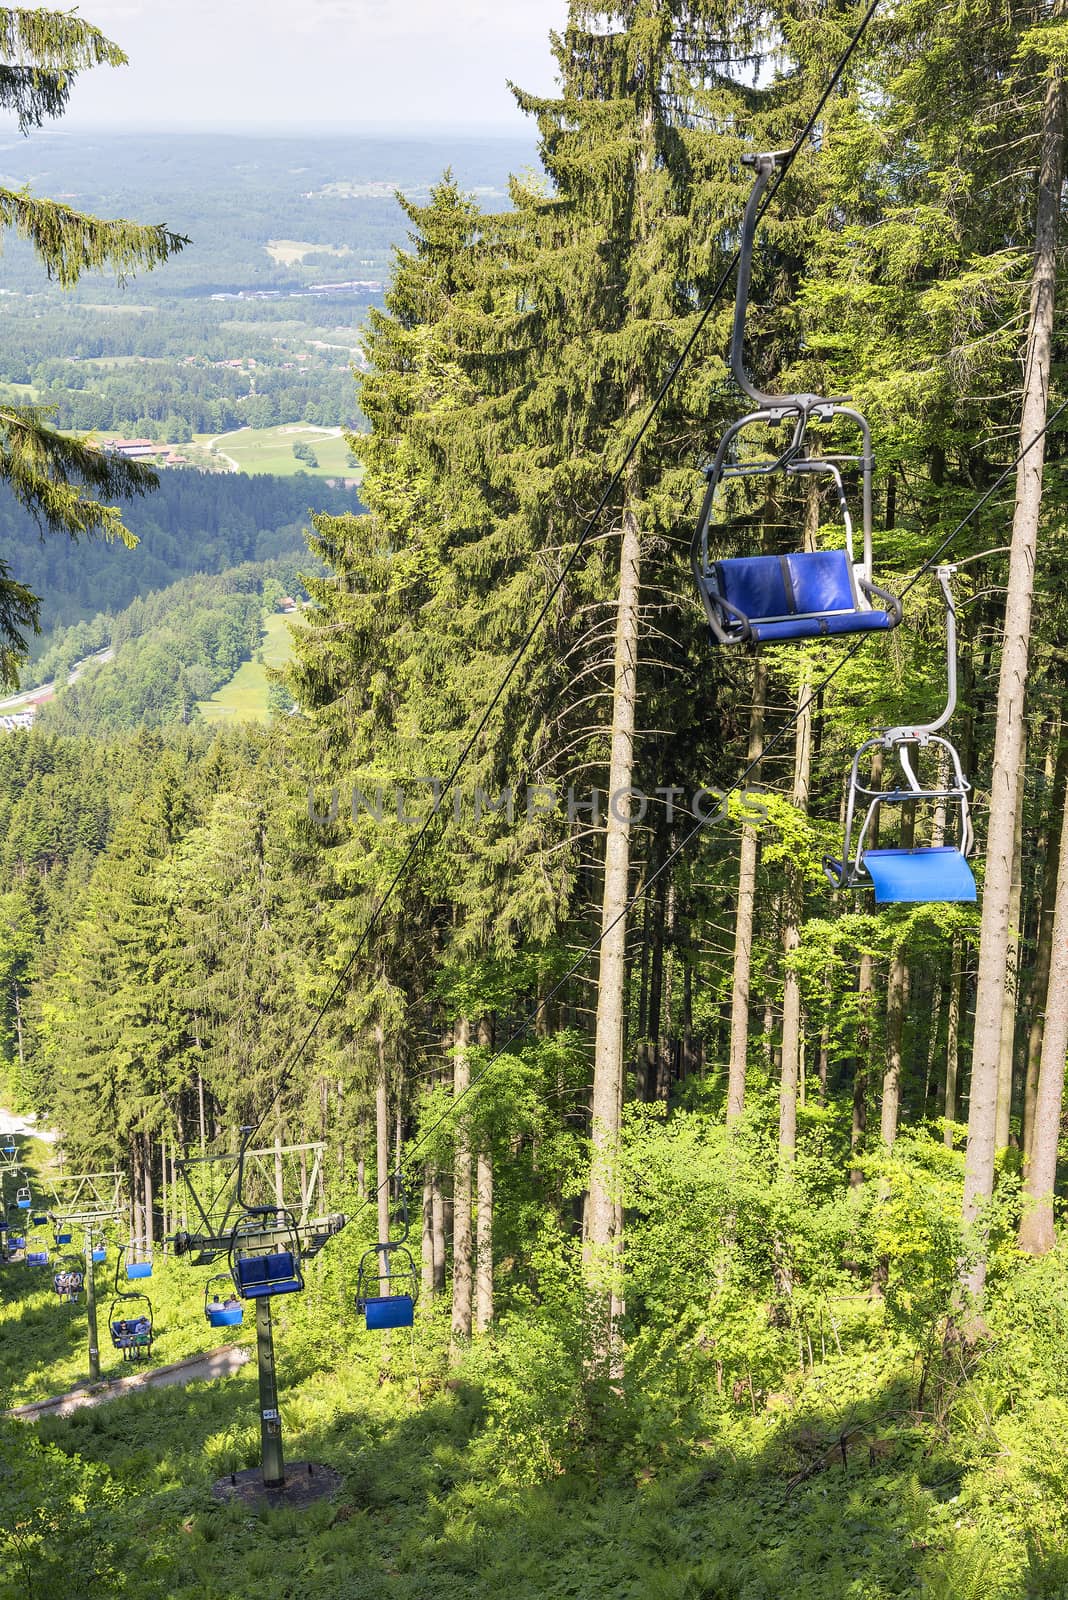 Image of a chairlift on mountain Blomberg in Bavaria Alps Germany in summer